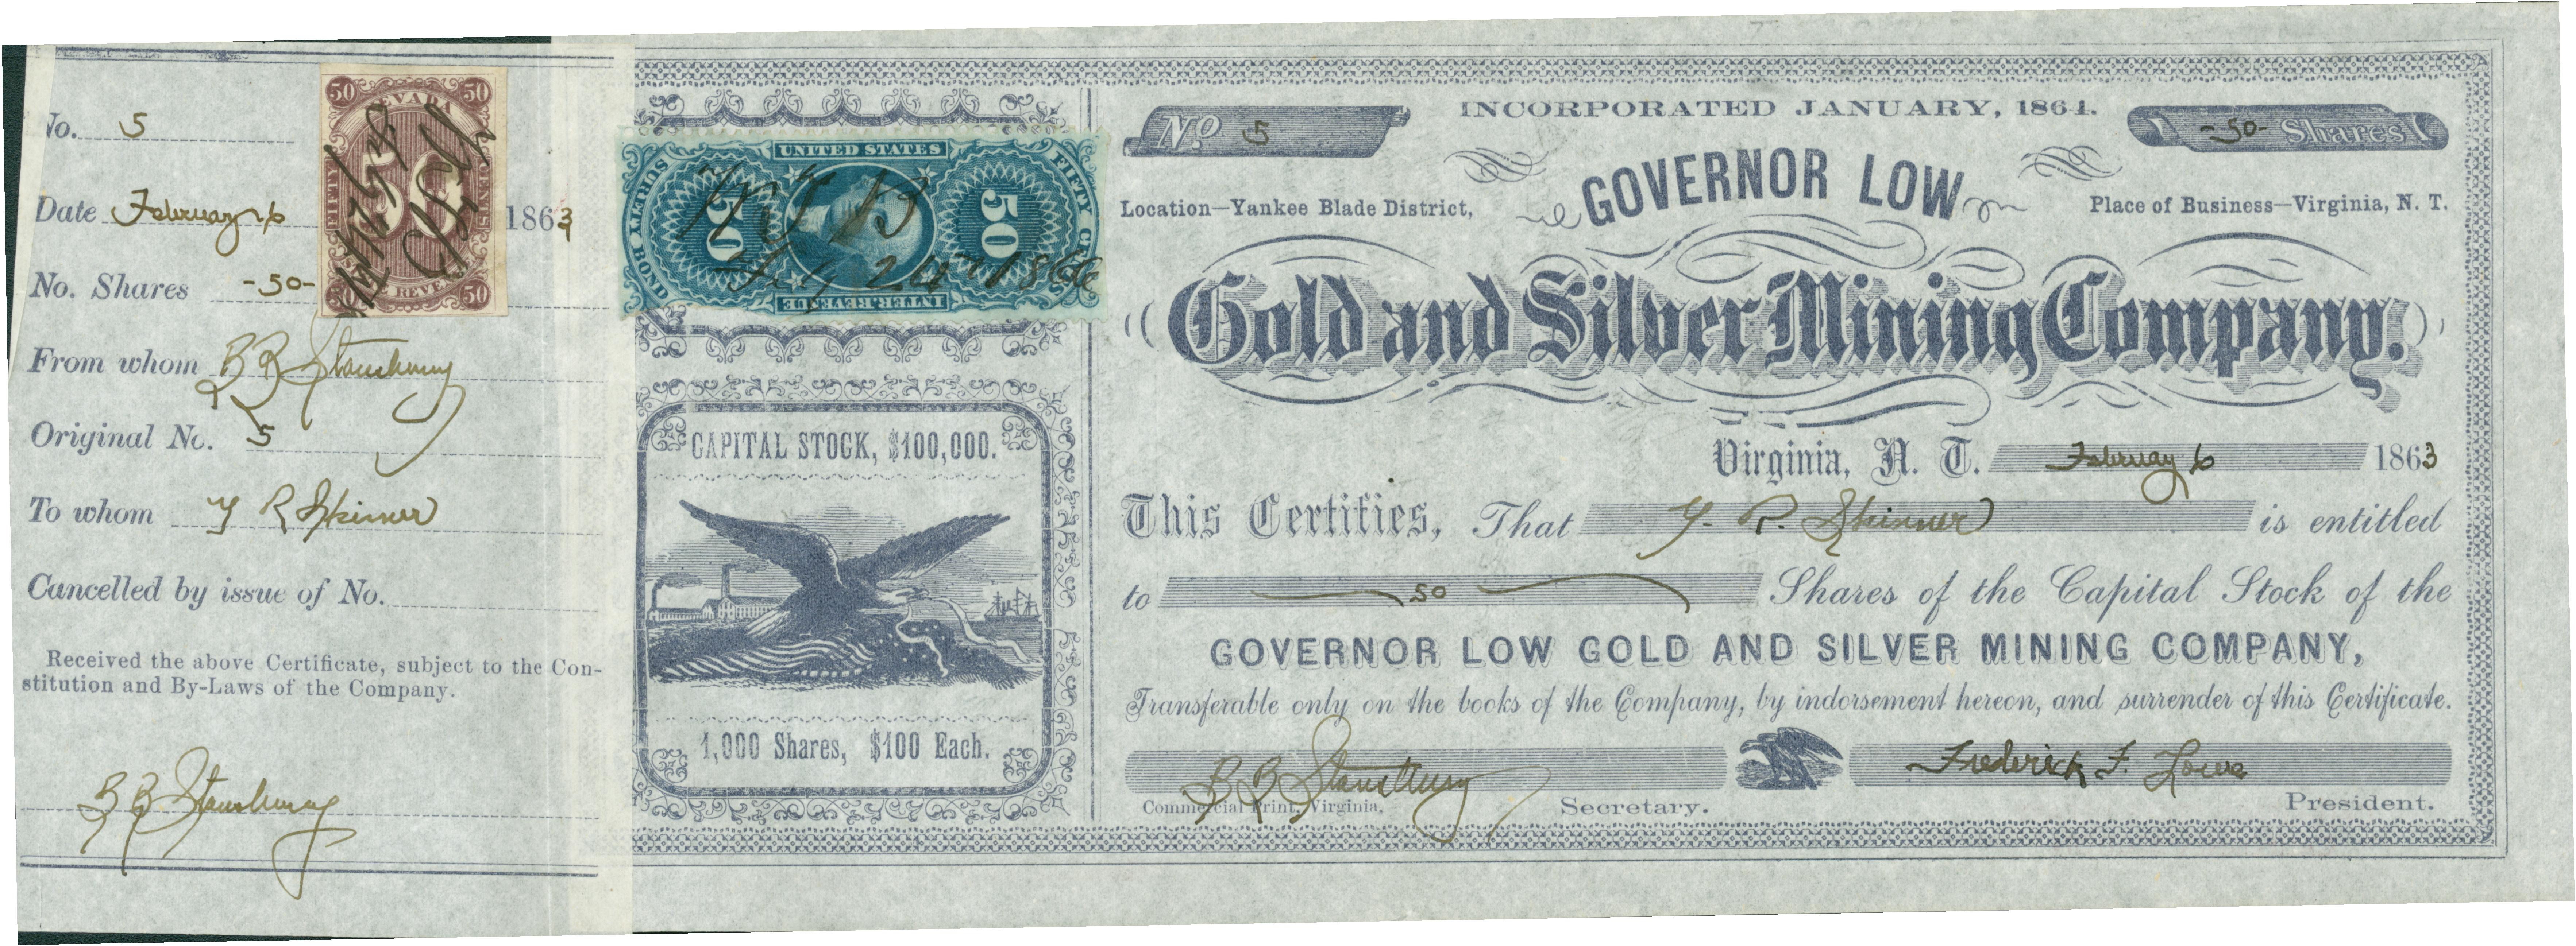 Stock certificate shows signature of Frederick F. Lowe (Governor of California, 1863-1867).
 (Edited from Stocks and Bonds to Mining, January 27, 2017)